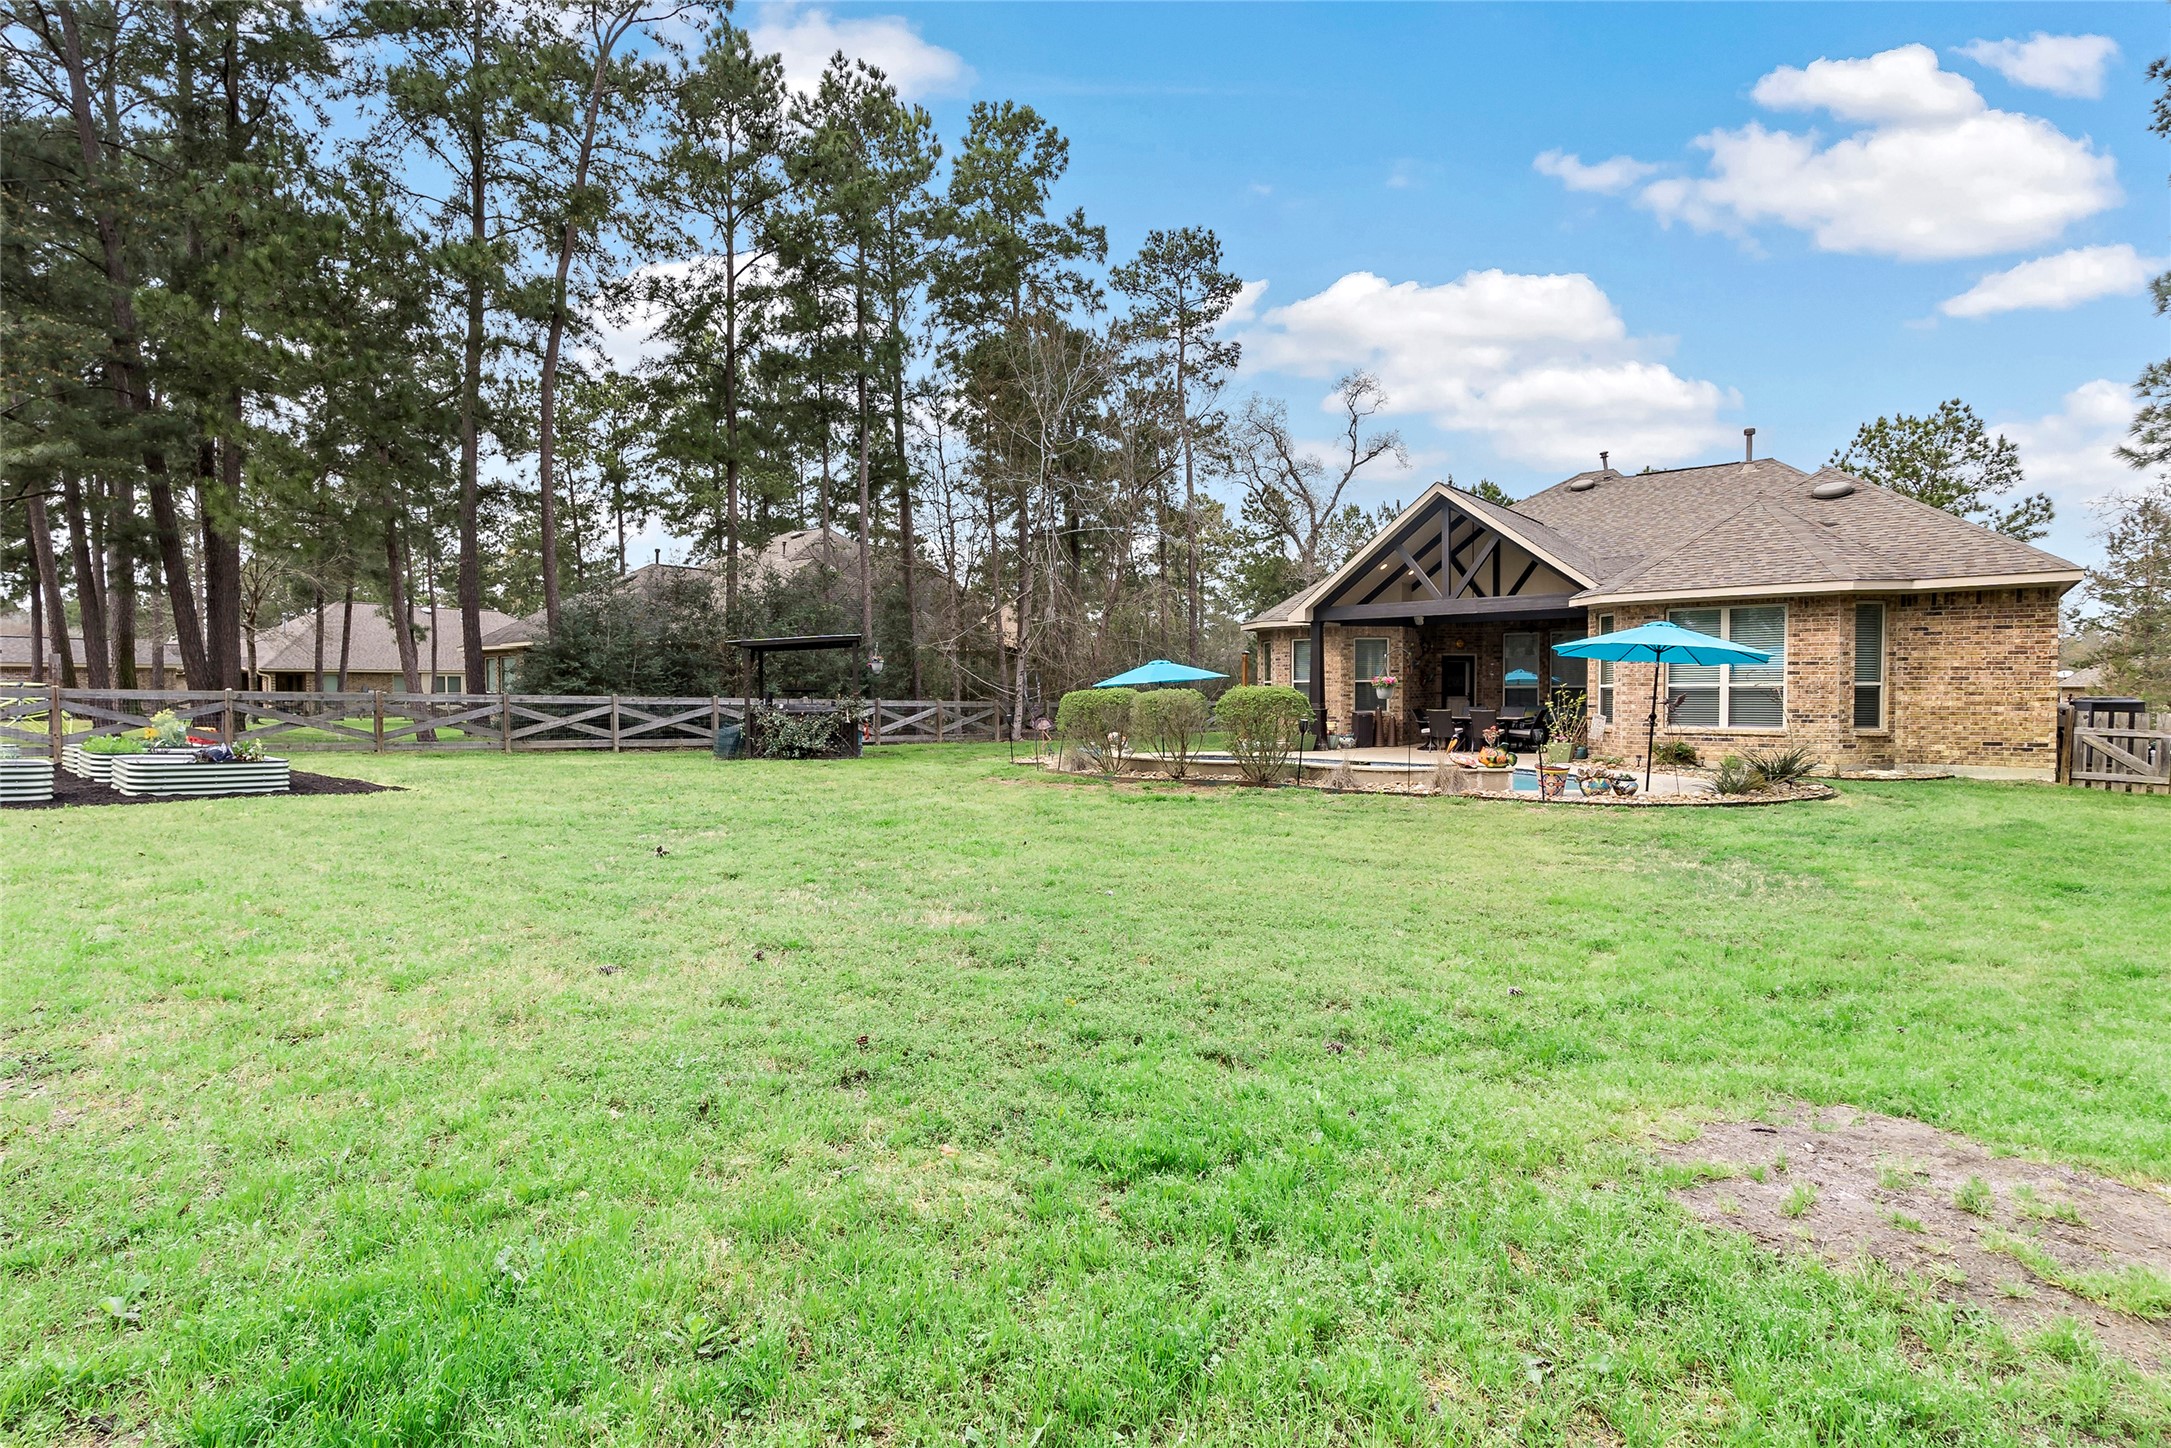 17807 Country Grove, Magnolia, Texas, 77355, United States, 4 Bedrooms Bedrooms, ,2 BathroomsBathrooms,Residential,For Sale,17807 Country Grove,1480733